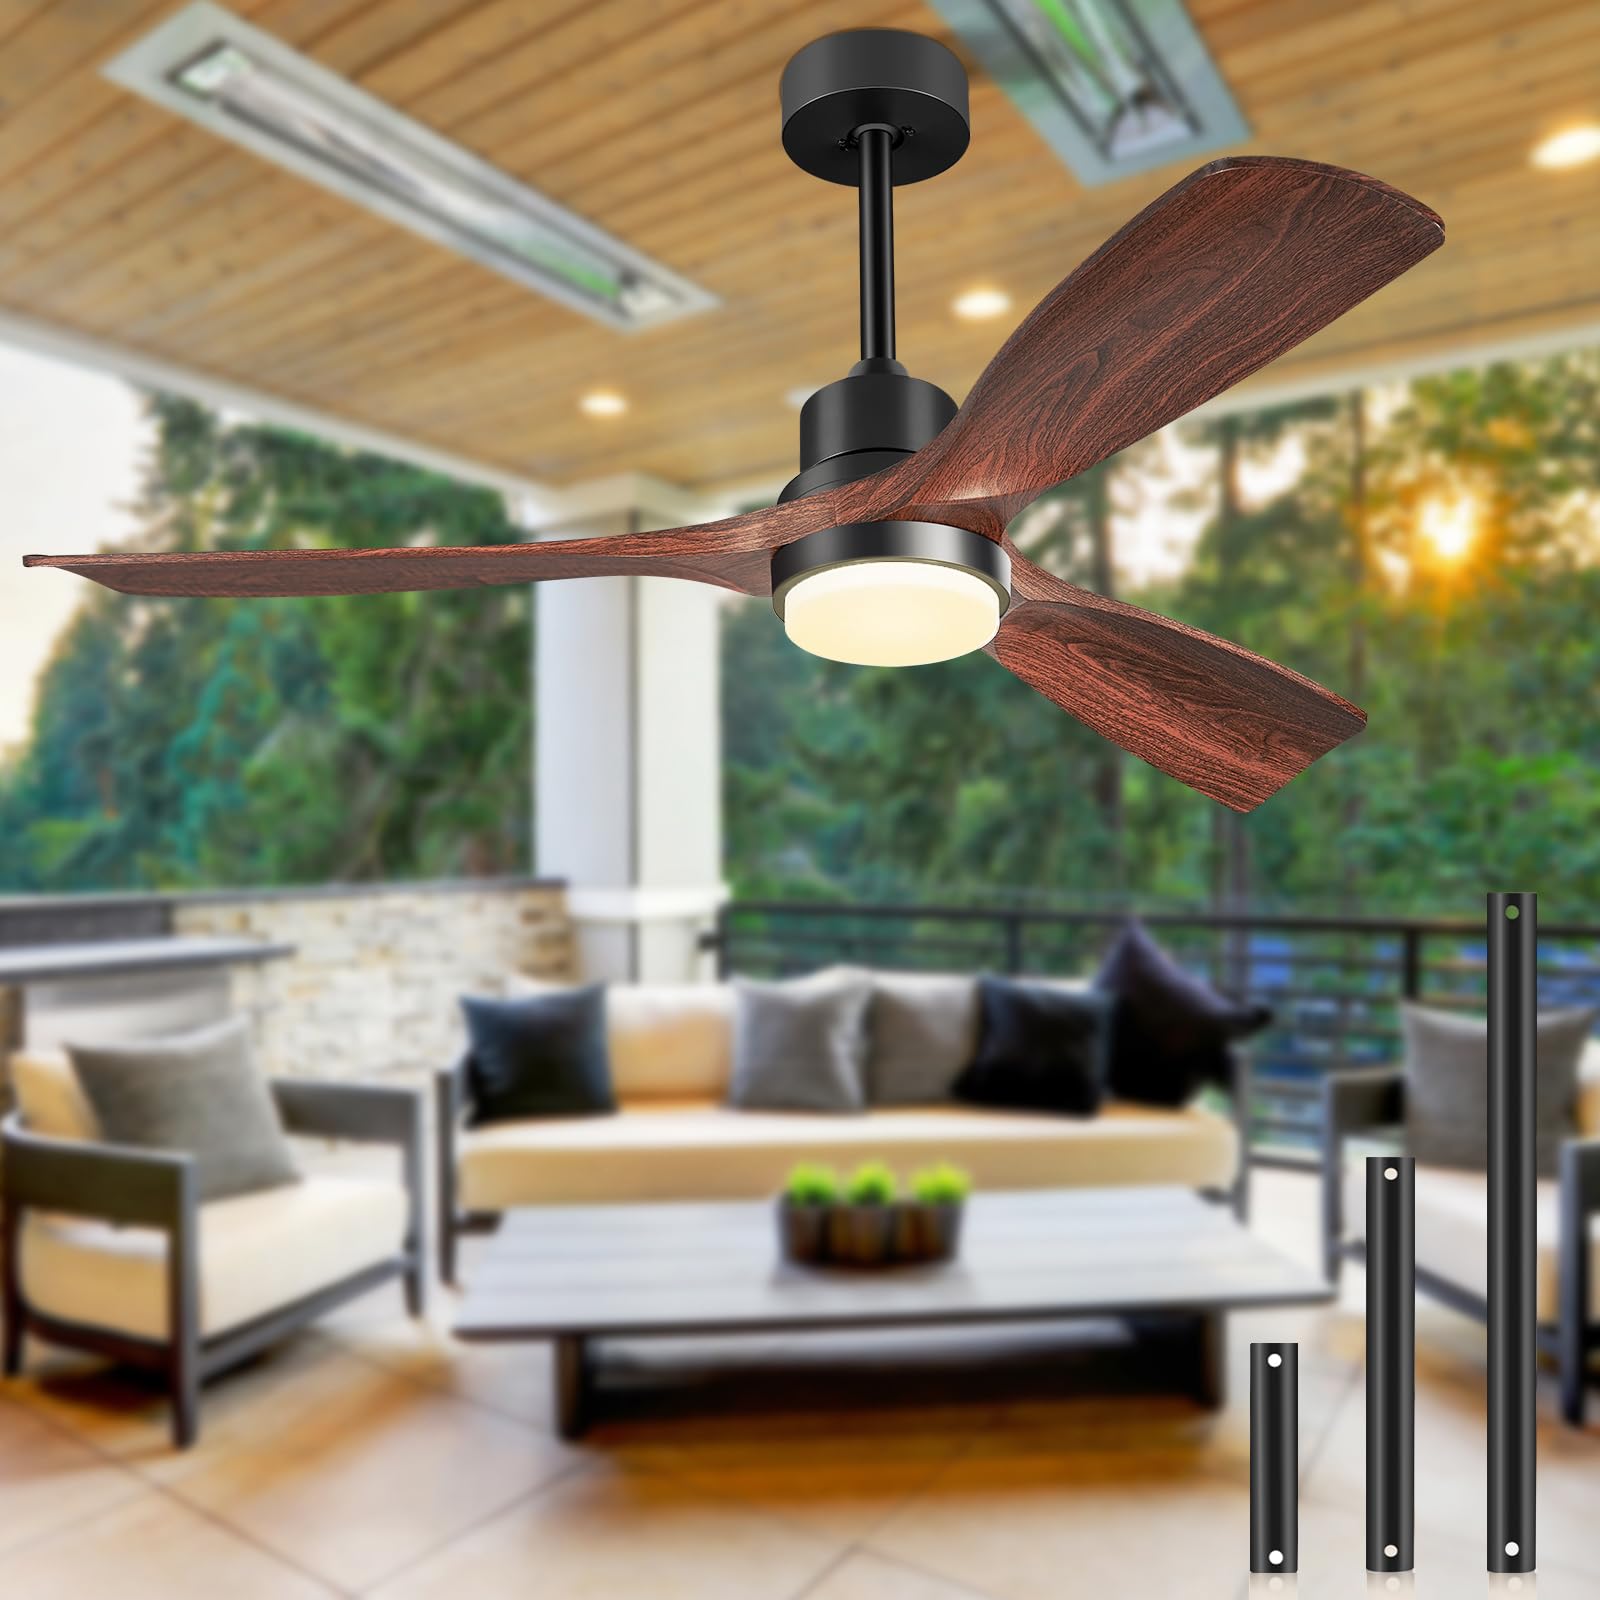 Forrovenco Ceiling Fans with Lights and Remote, 52 Inch Outdoor Ceiling Fan for Patios with Light 3 Downrods, 3 Blades Modern Ceiling Fan Noiseless Reversible DC Motor, Wood Fan for Farmhouse Walnut Wood 52 Inch